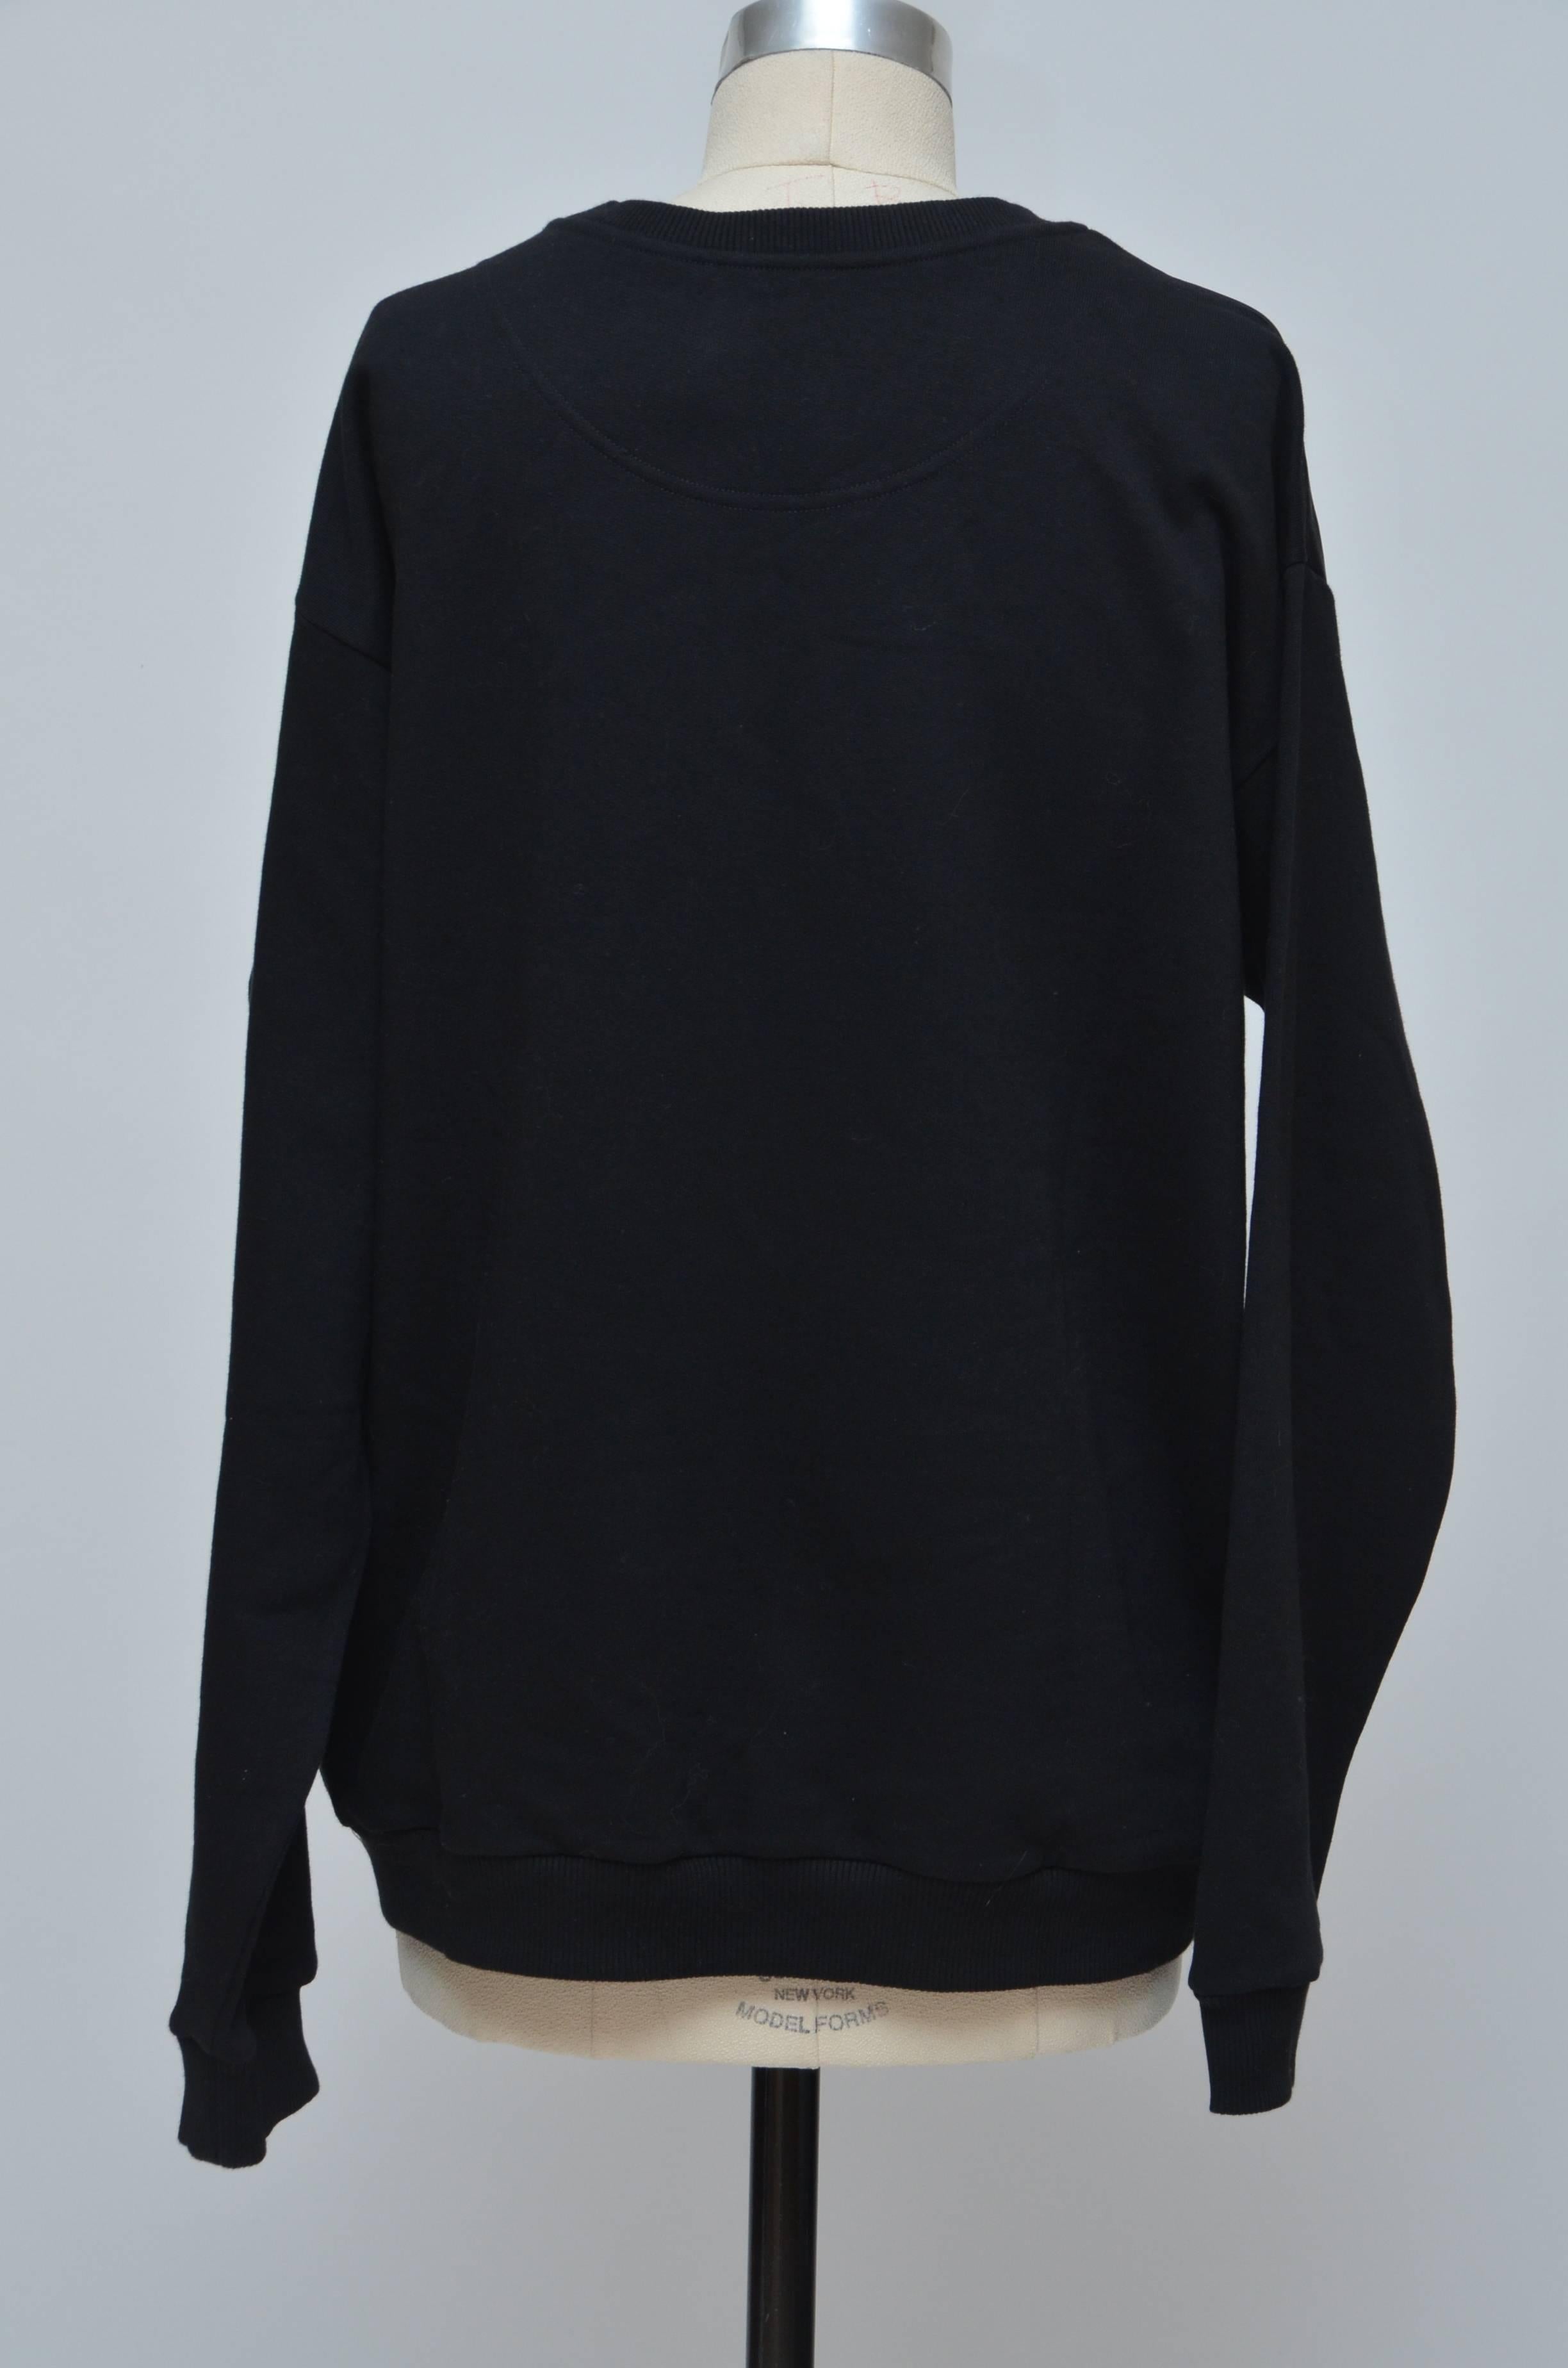 Christopher Kane sweatshirt.
New with tags.
Size L

FINAL SALE.